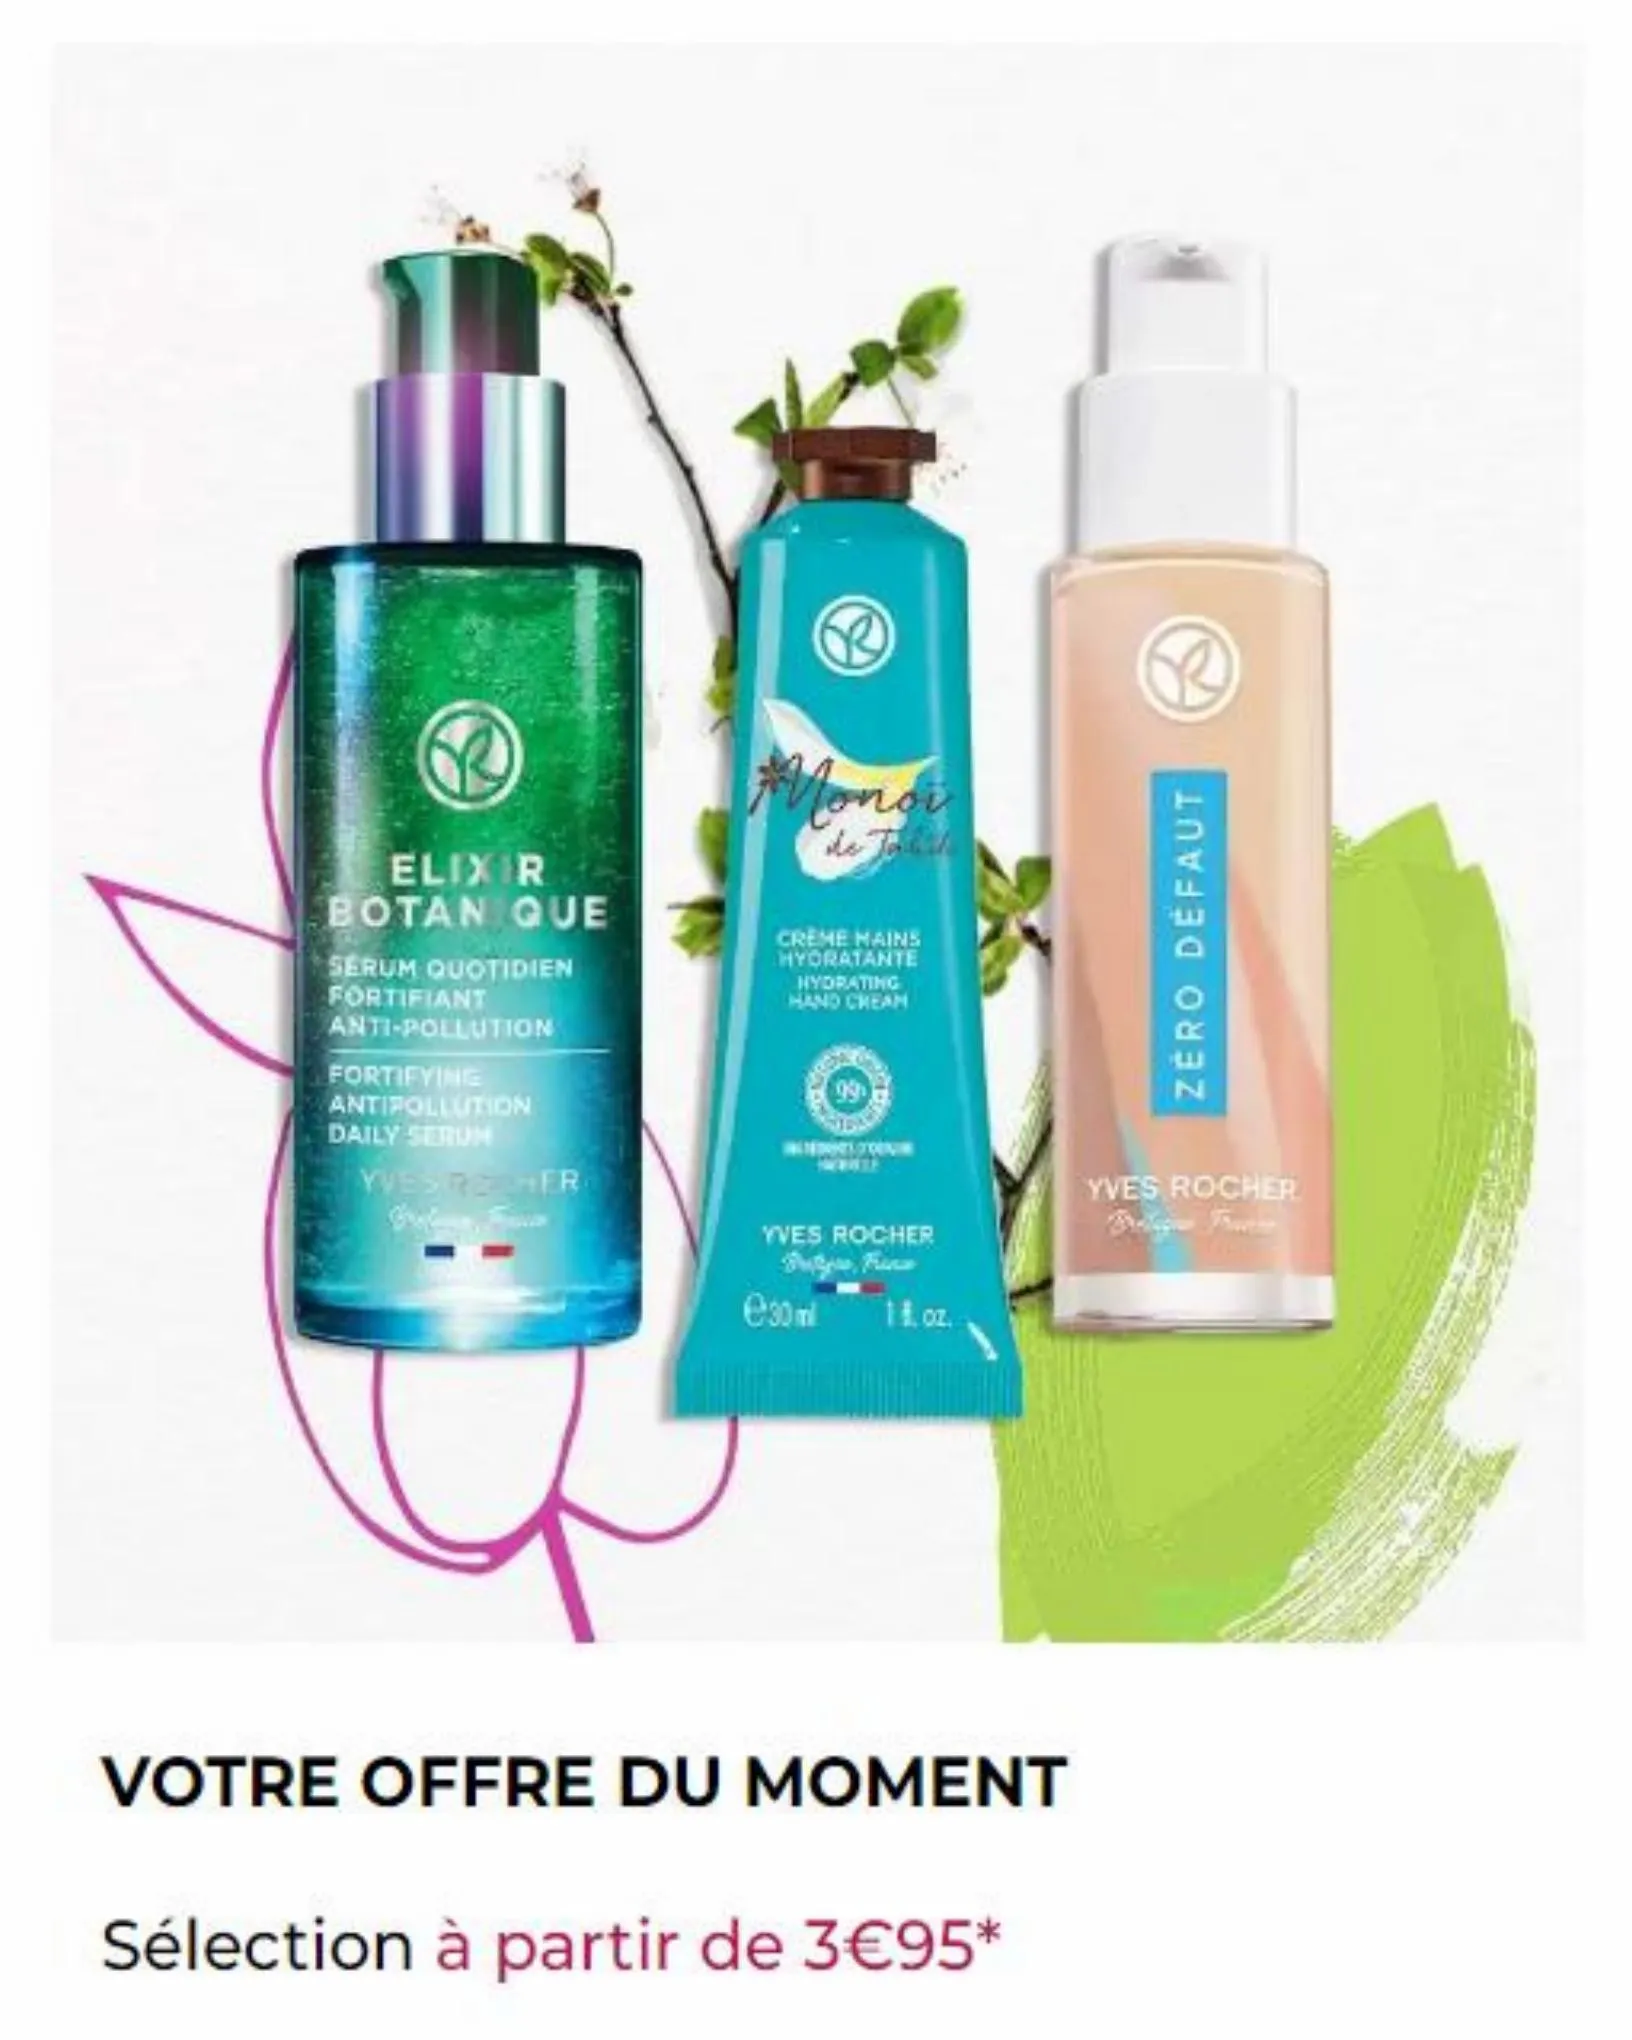 Catalogue Mes Promotions Yves Rocher, page 00003